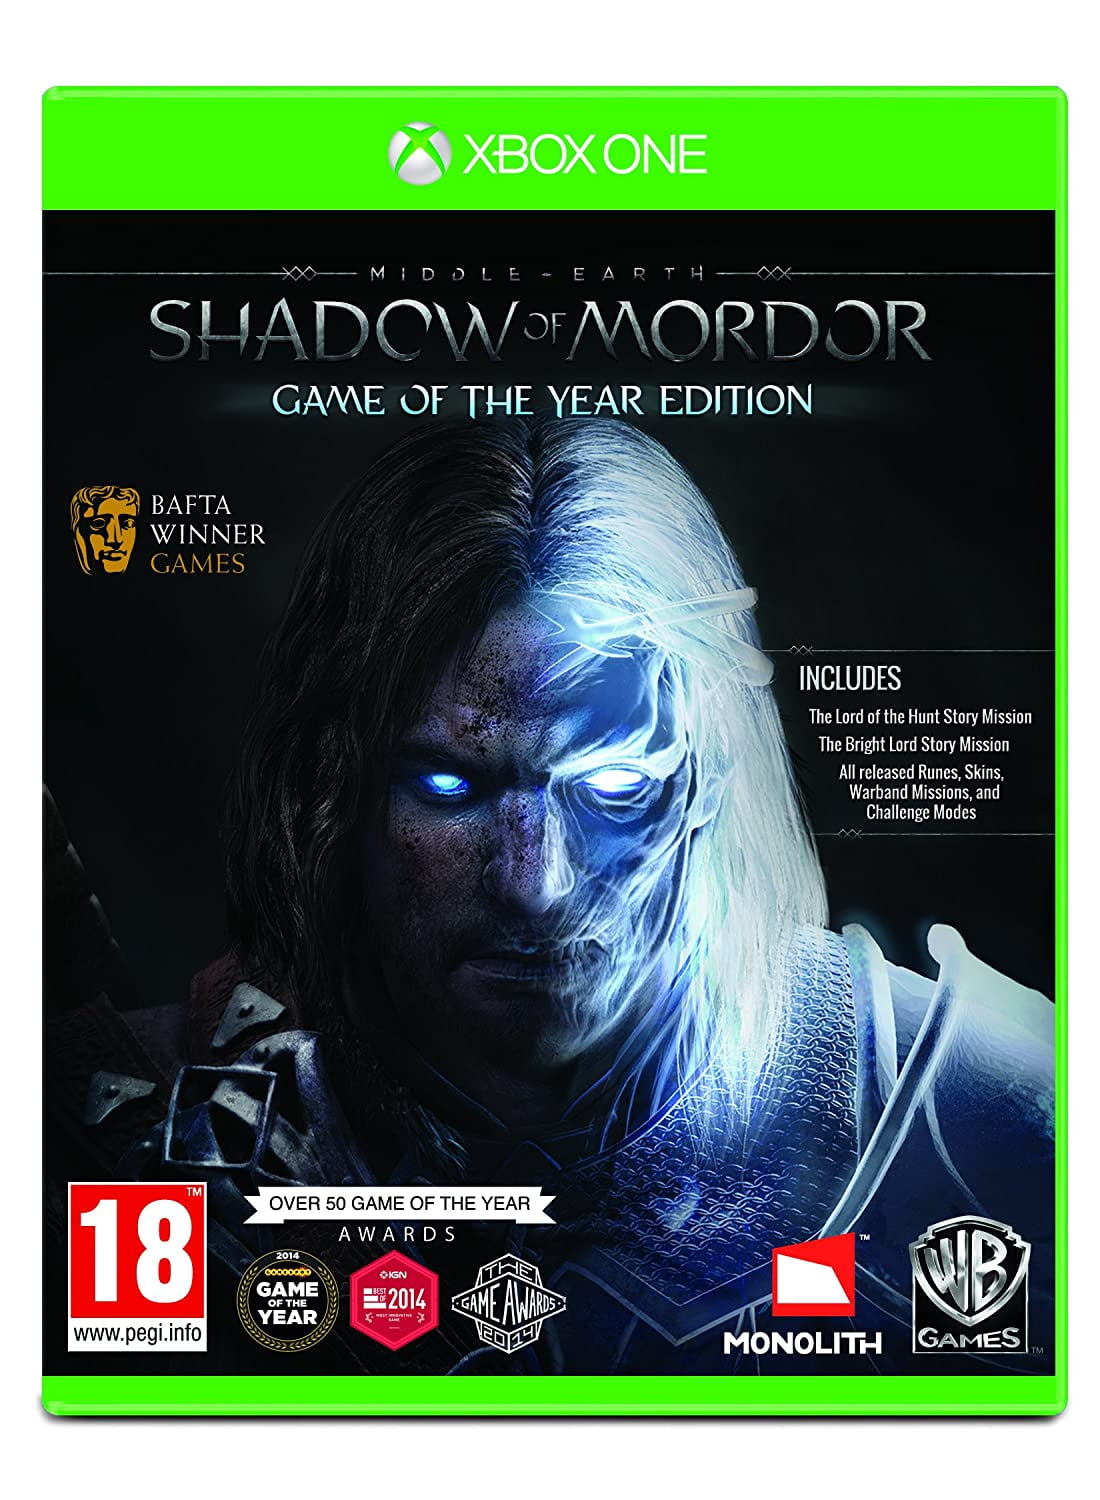 Middle - Earth: Of Mordor Game The Year Edition (Xbox One), Story Packs: The Lord The Hunt and The Bright Lord By Brand Warner bros interactive entertainment inc